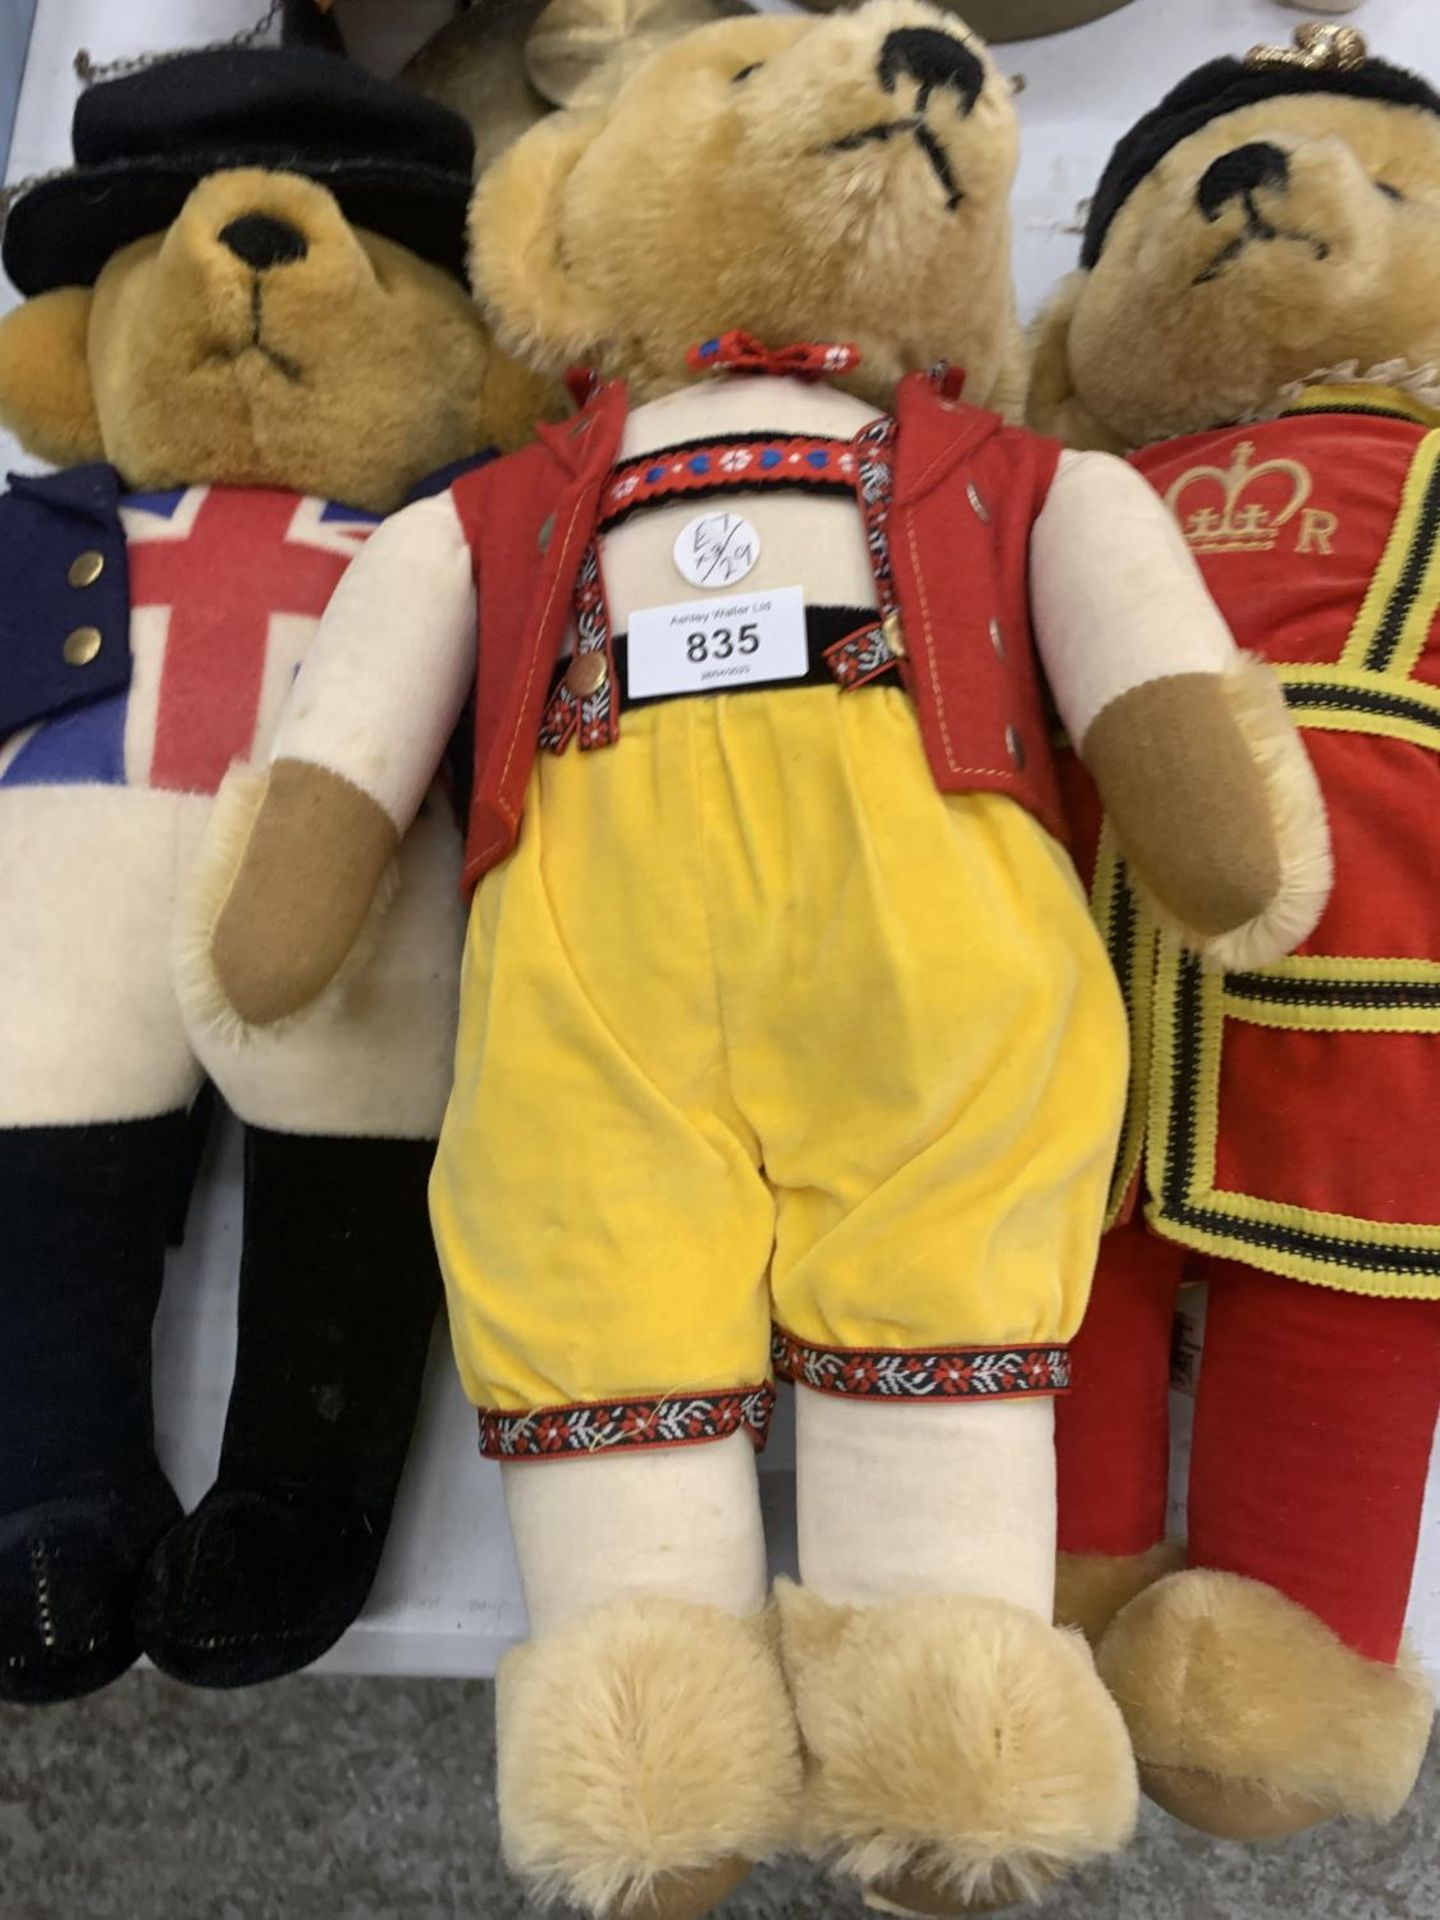 THREE VINTAGE MERRYTHOUGHT TEDDY BEARS, TWO IN ROYAL REGALIA, ALL WITH THE MERRYTHOUGHT LABEL - Image 3 of 4